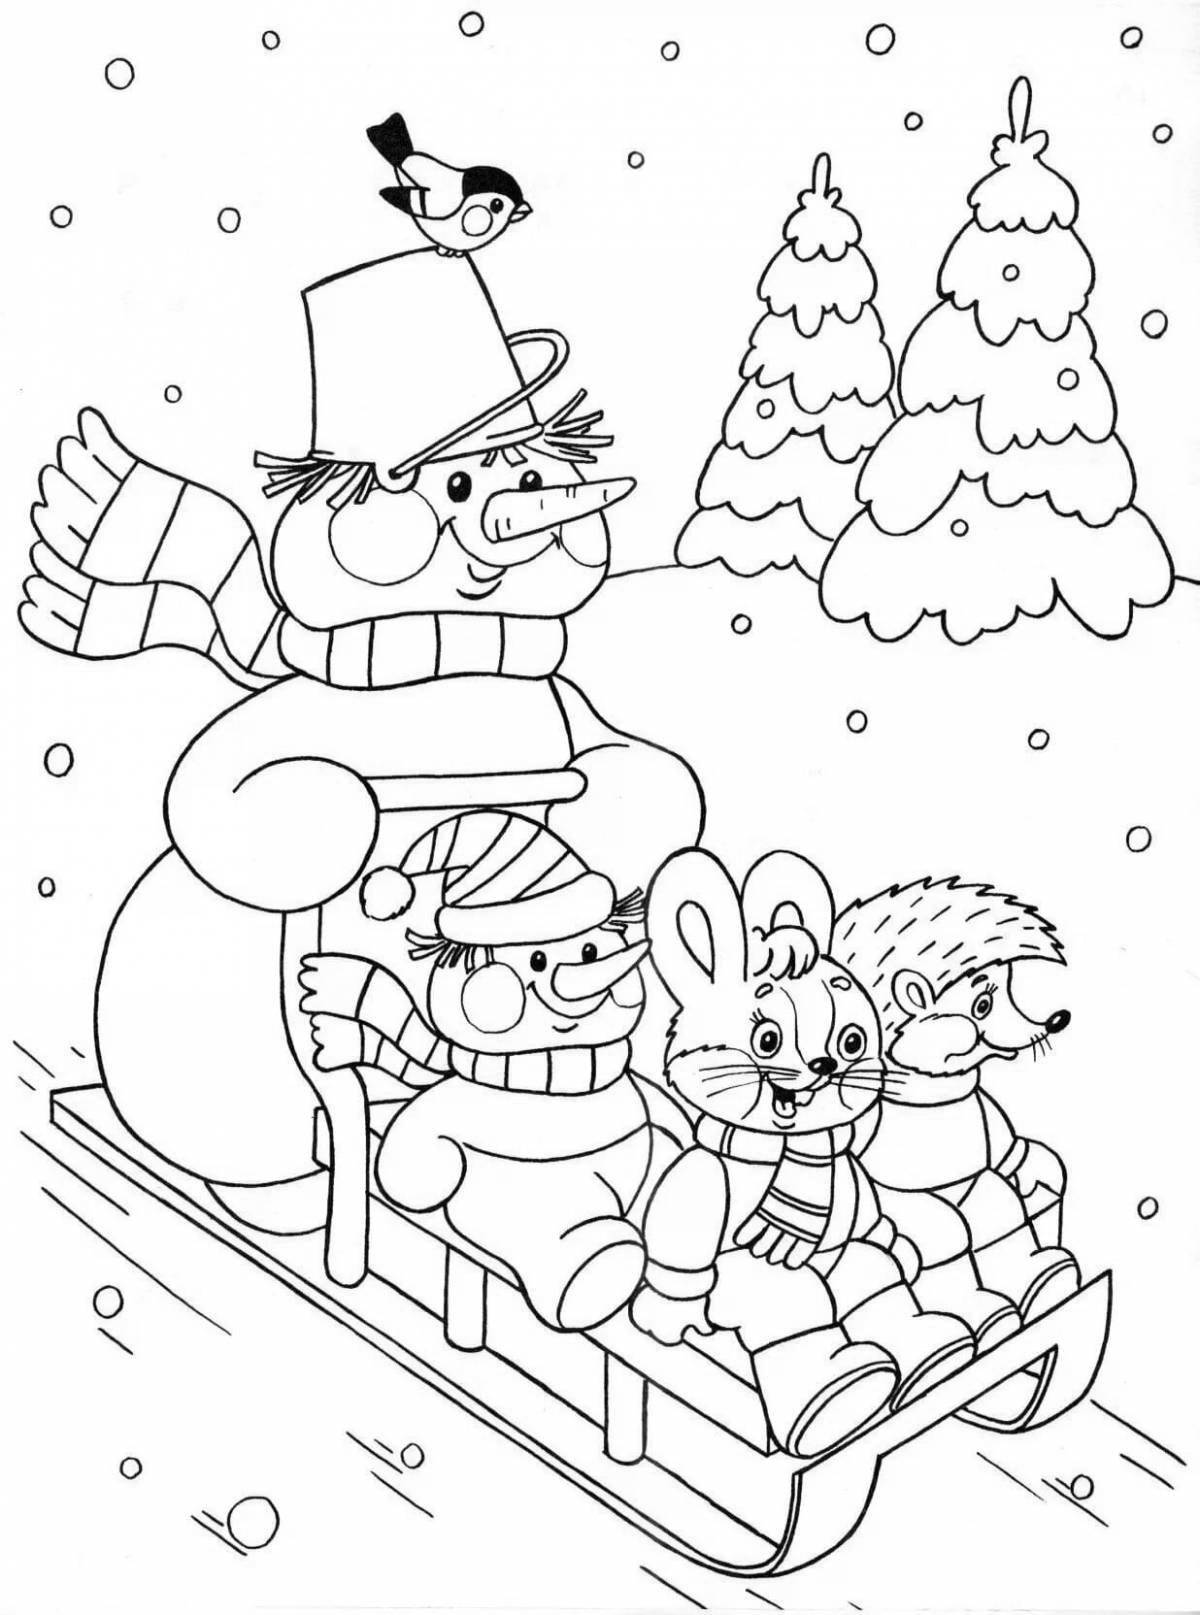 Fabulous Christmas coloring book for children 6-7 years old